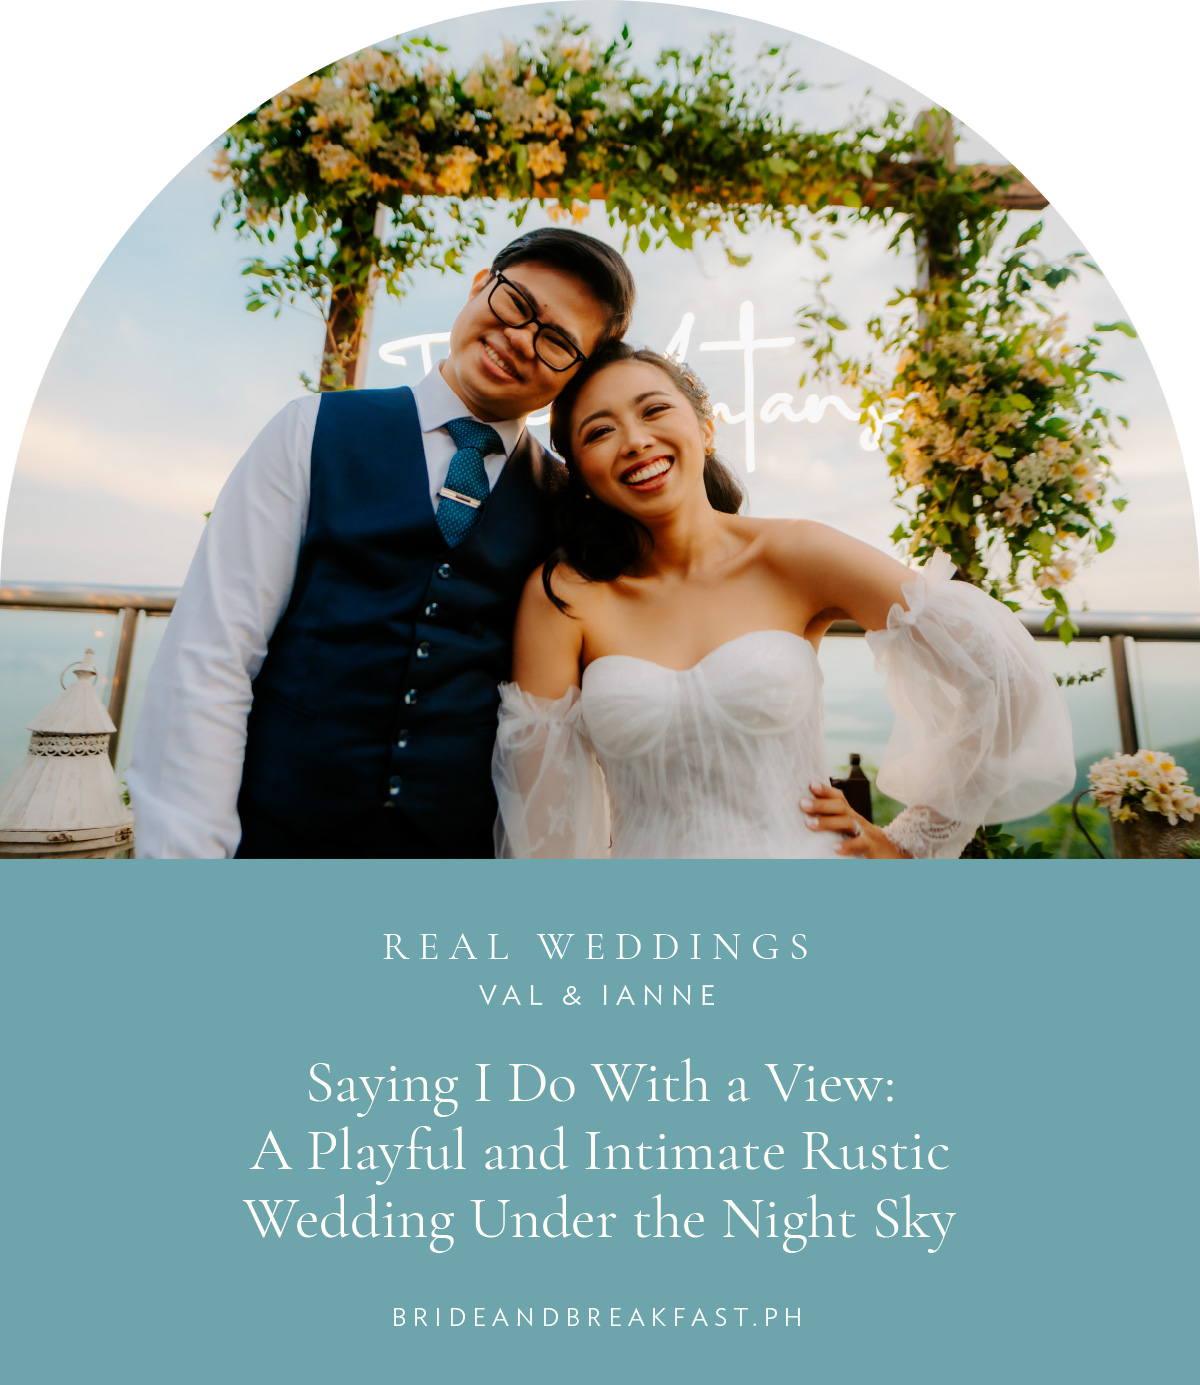 Saying I Do With a View: A Playful and Intimate Rustic Wedding Under the Night Sky